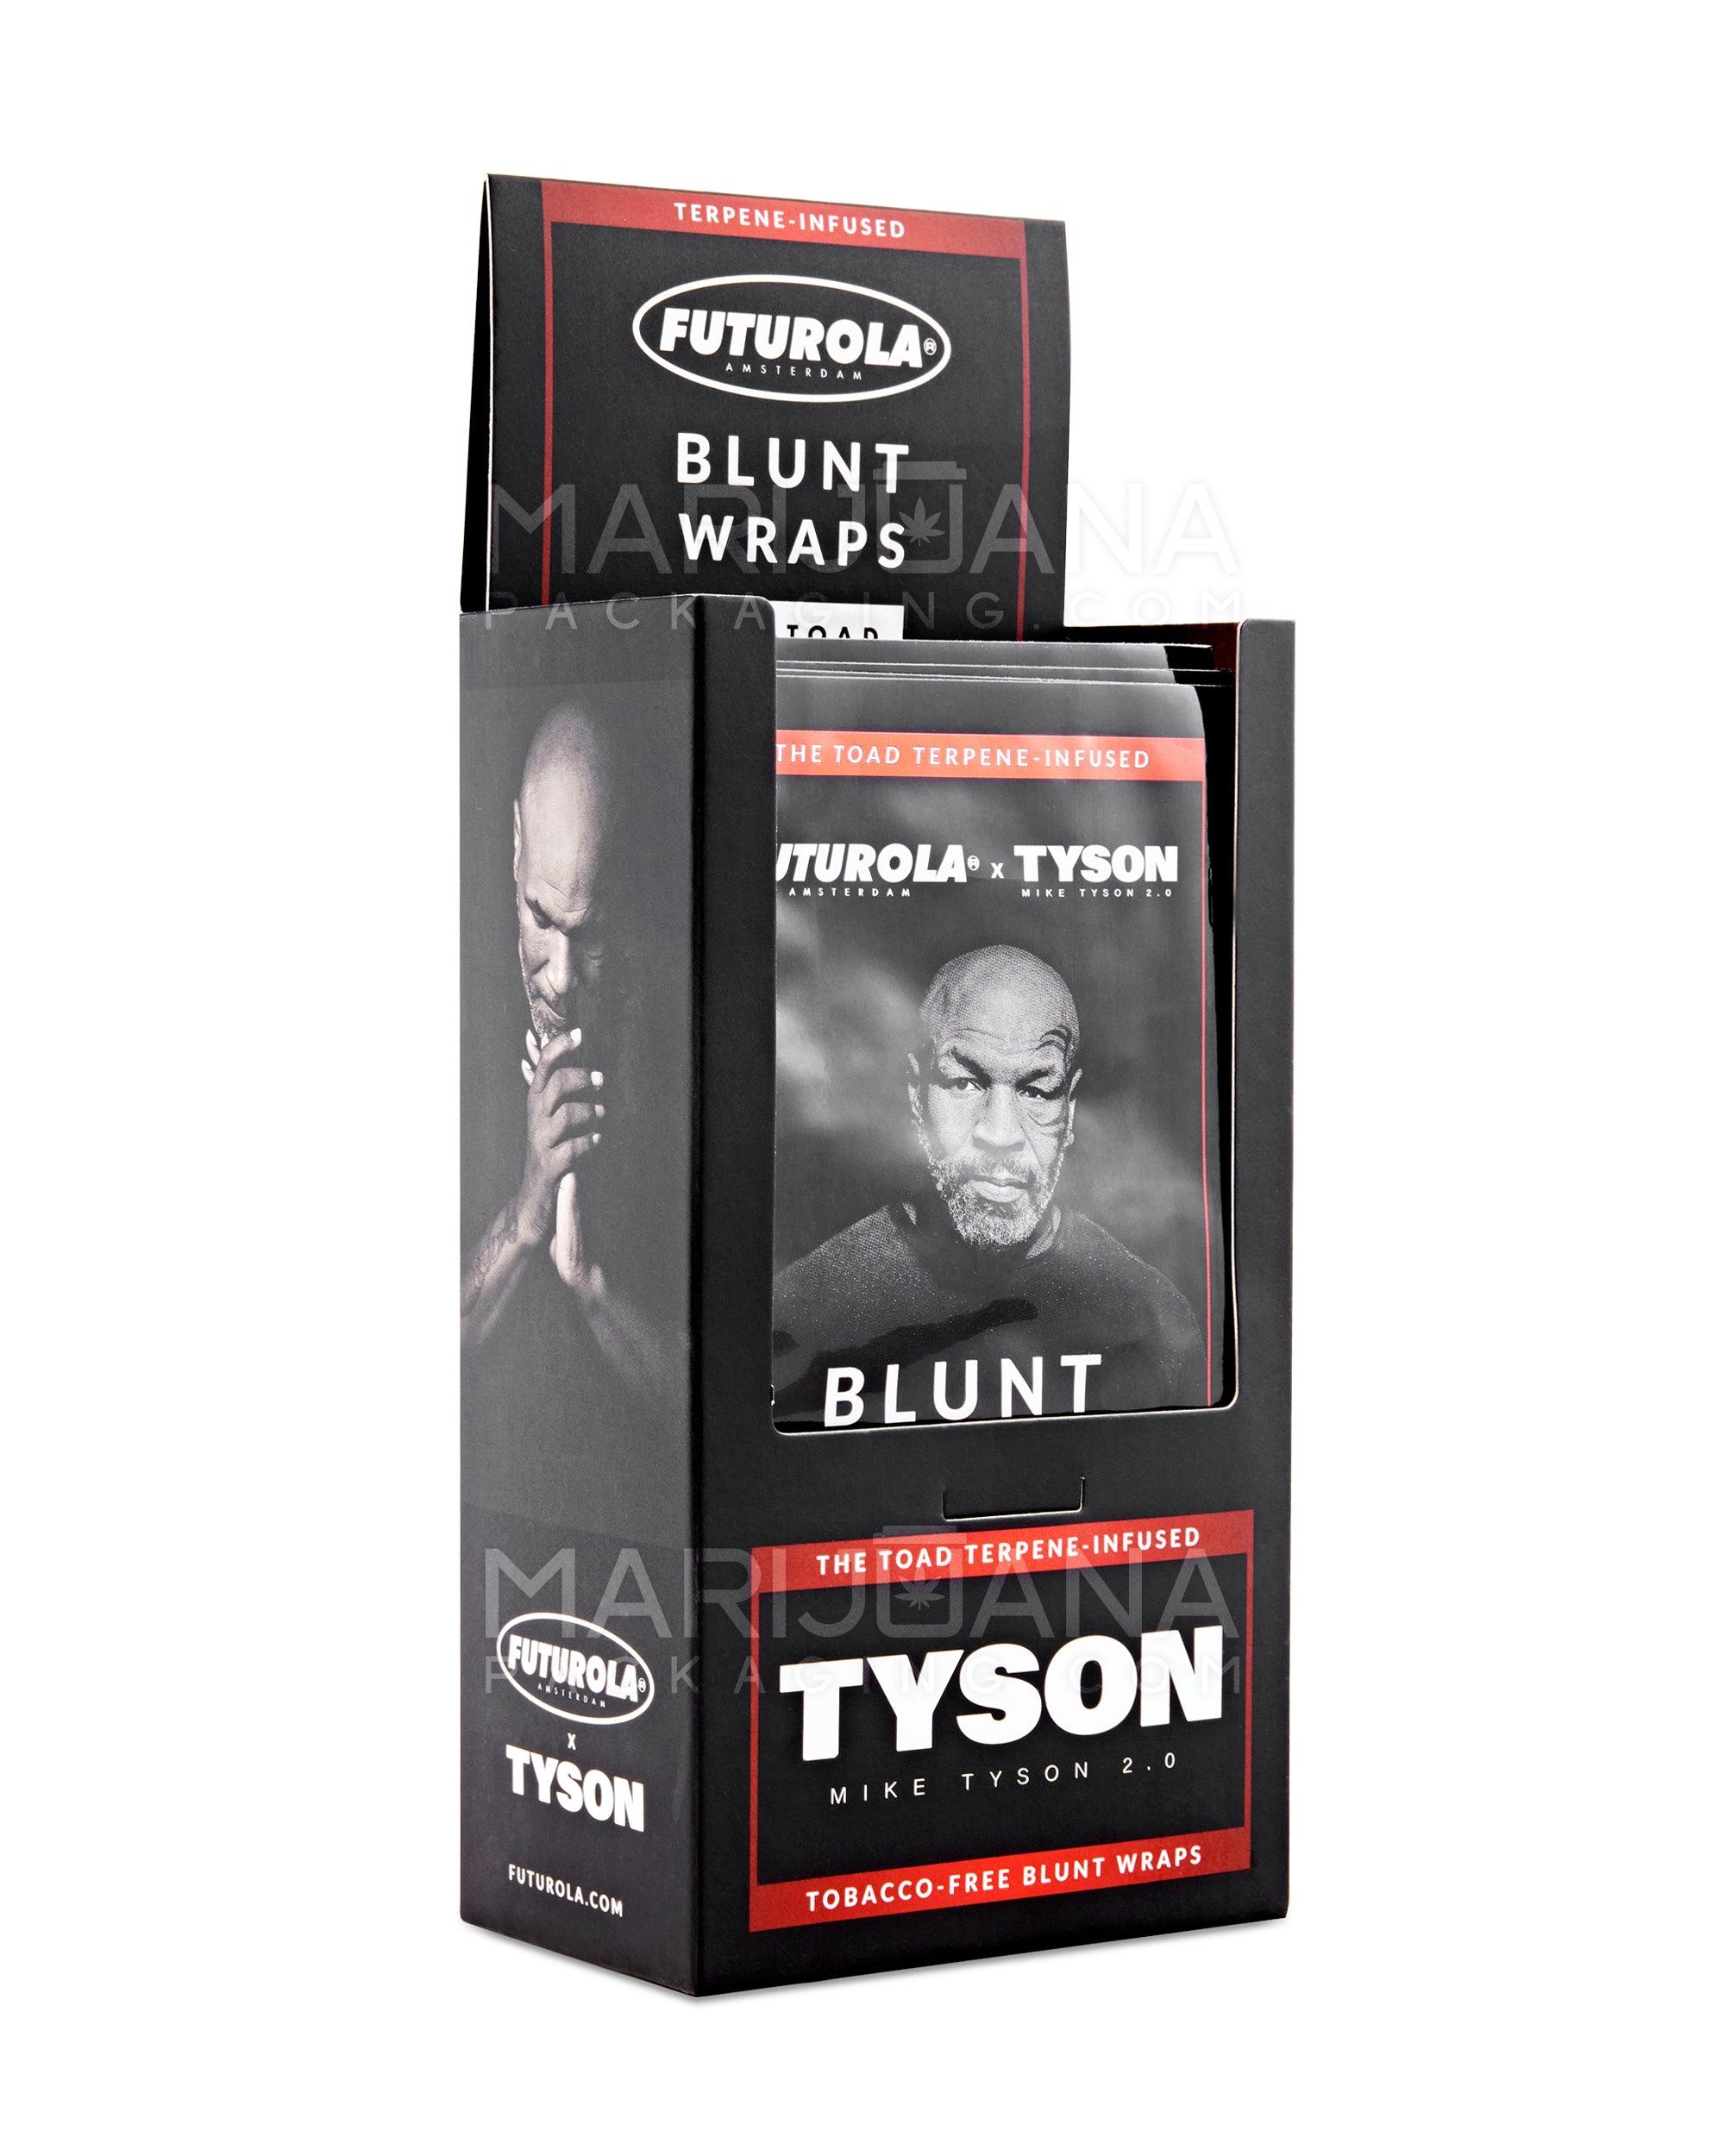 FUTUROLA | 'Retail Display' Tyson Ranch 2.0 "The Toad" Terpene Infused Blunt Wraps | 109mm - Blunt Paper - 25 Count